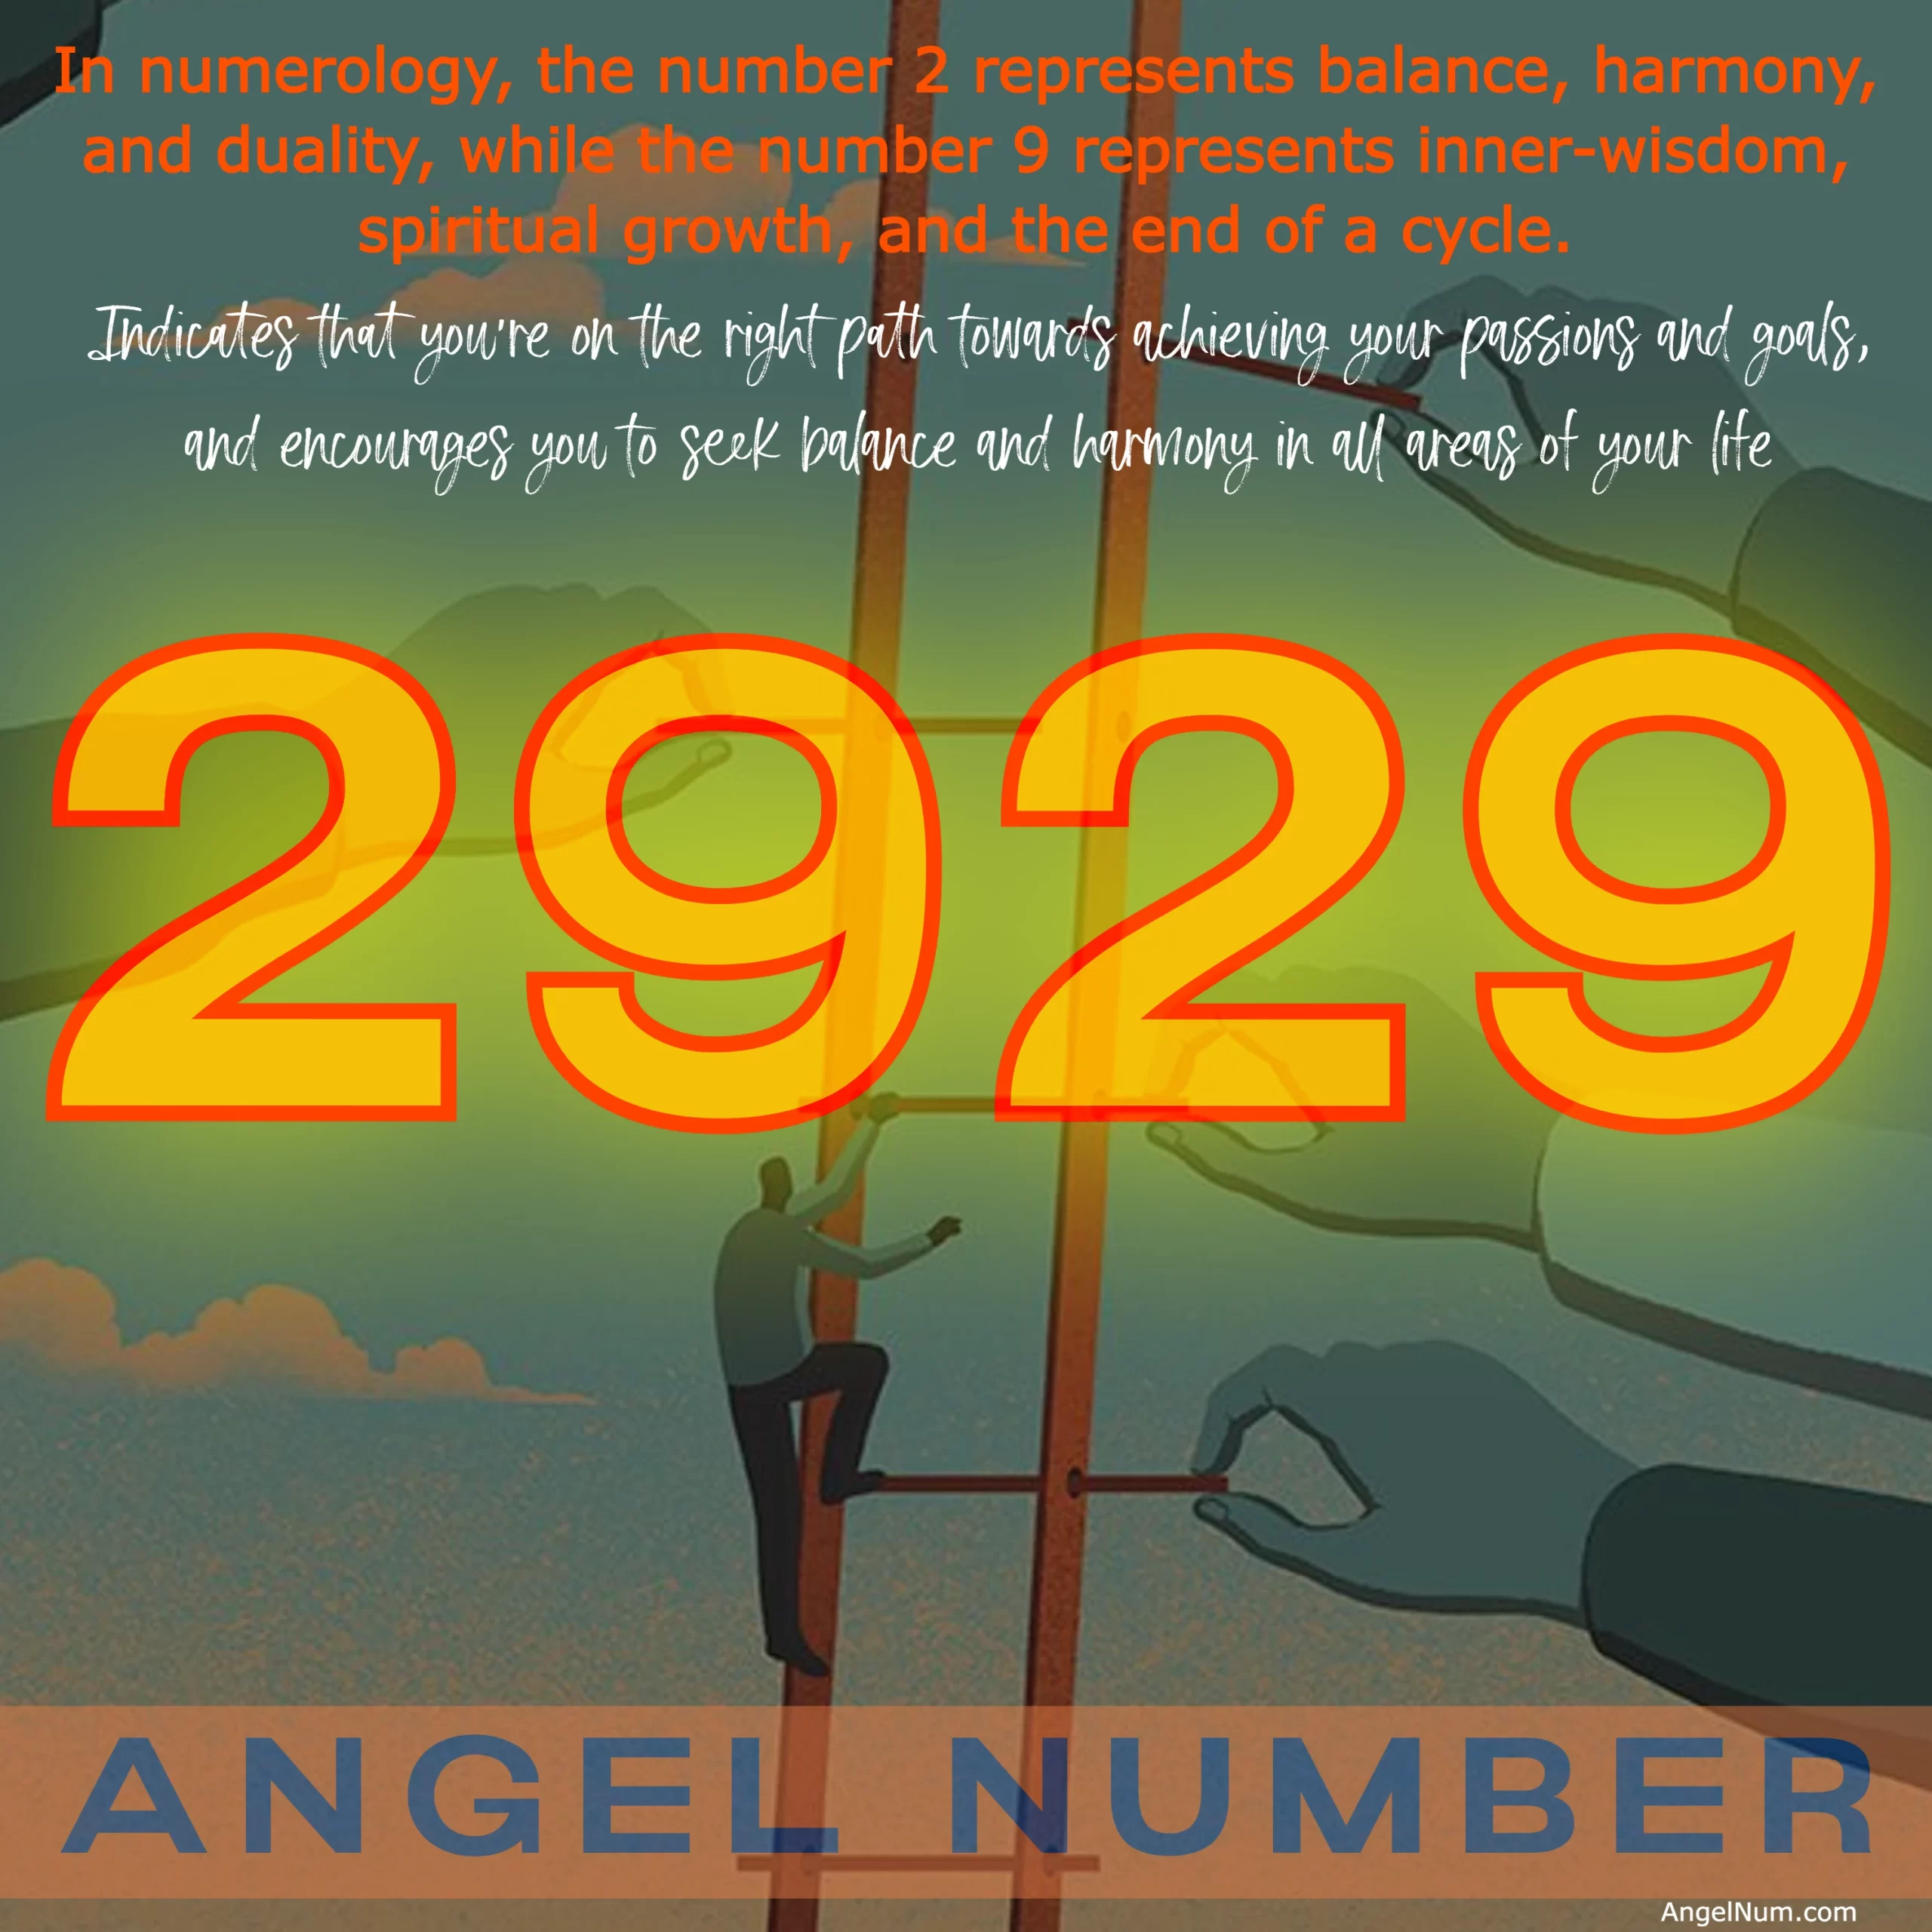 Angel Number 2929: Meaning, Symbolism, and Significance